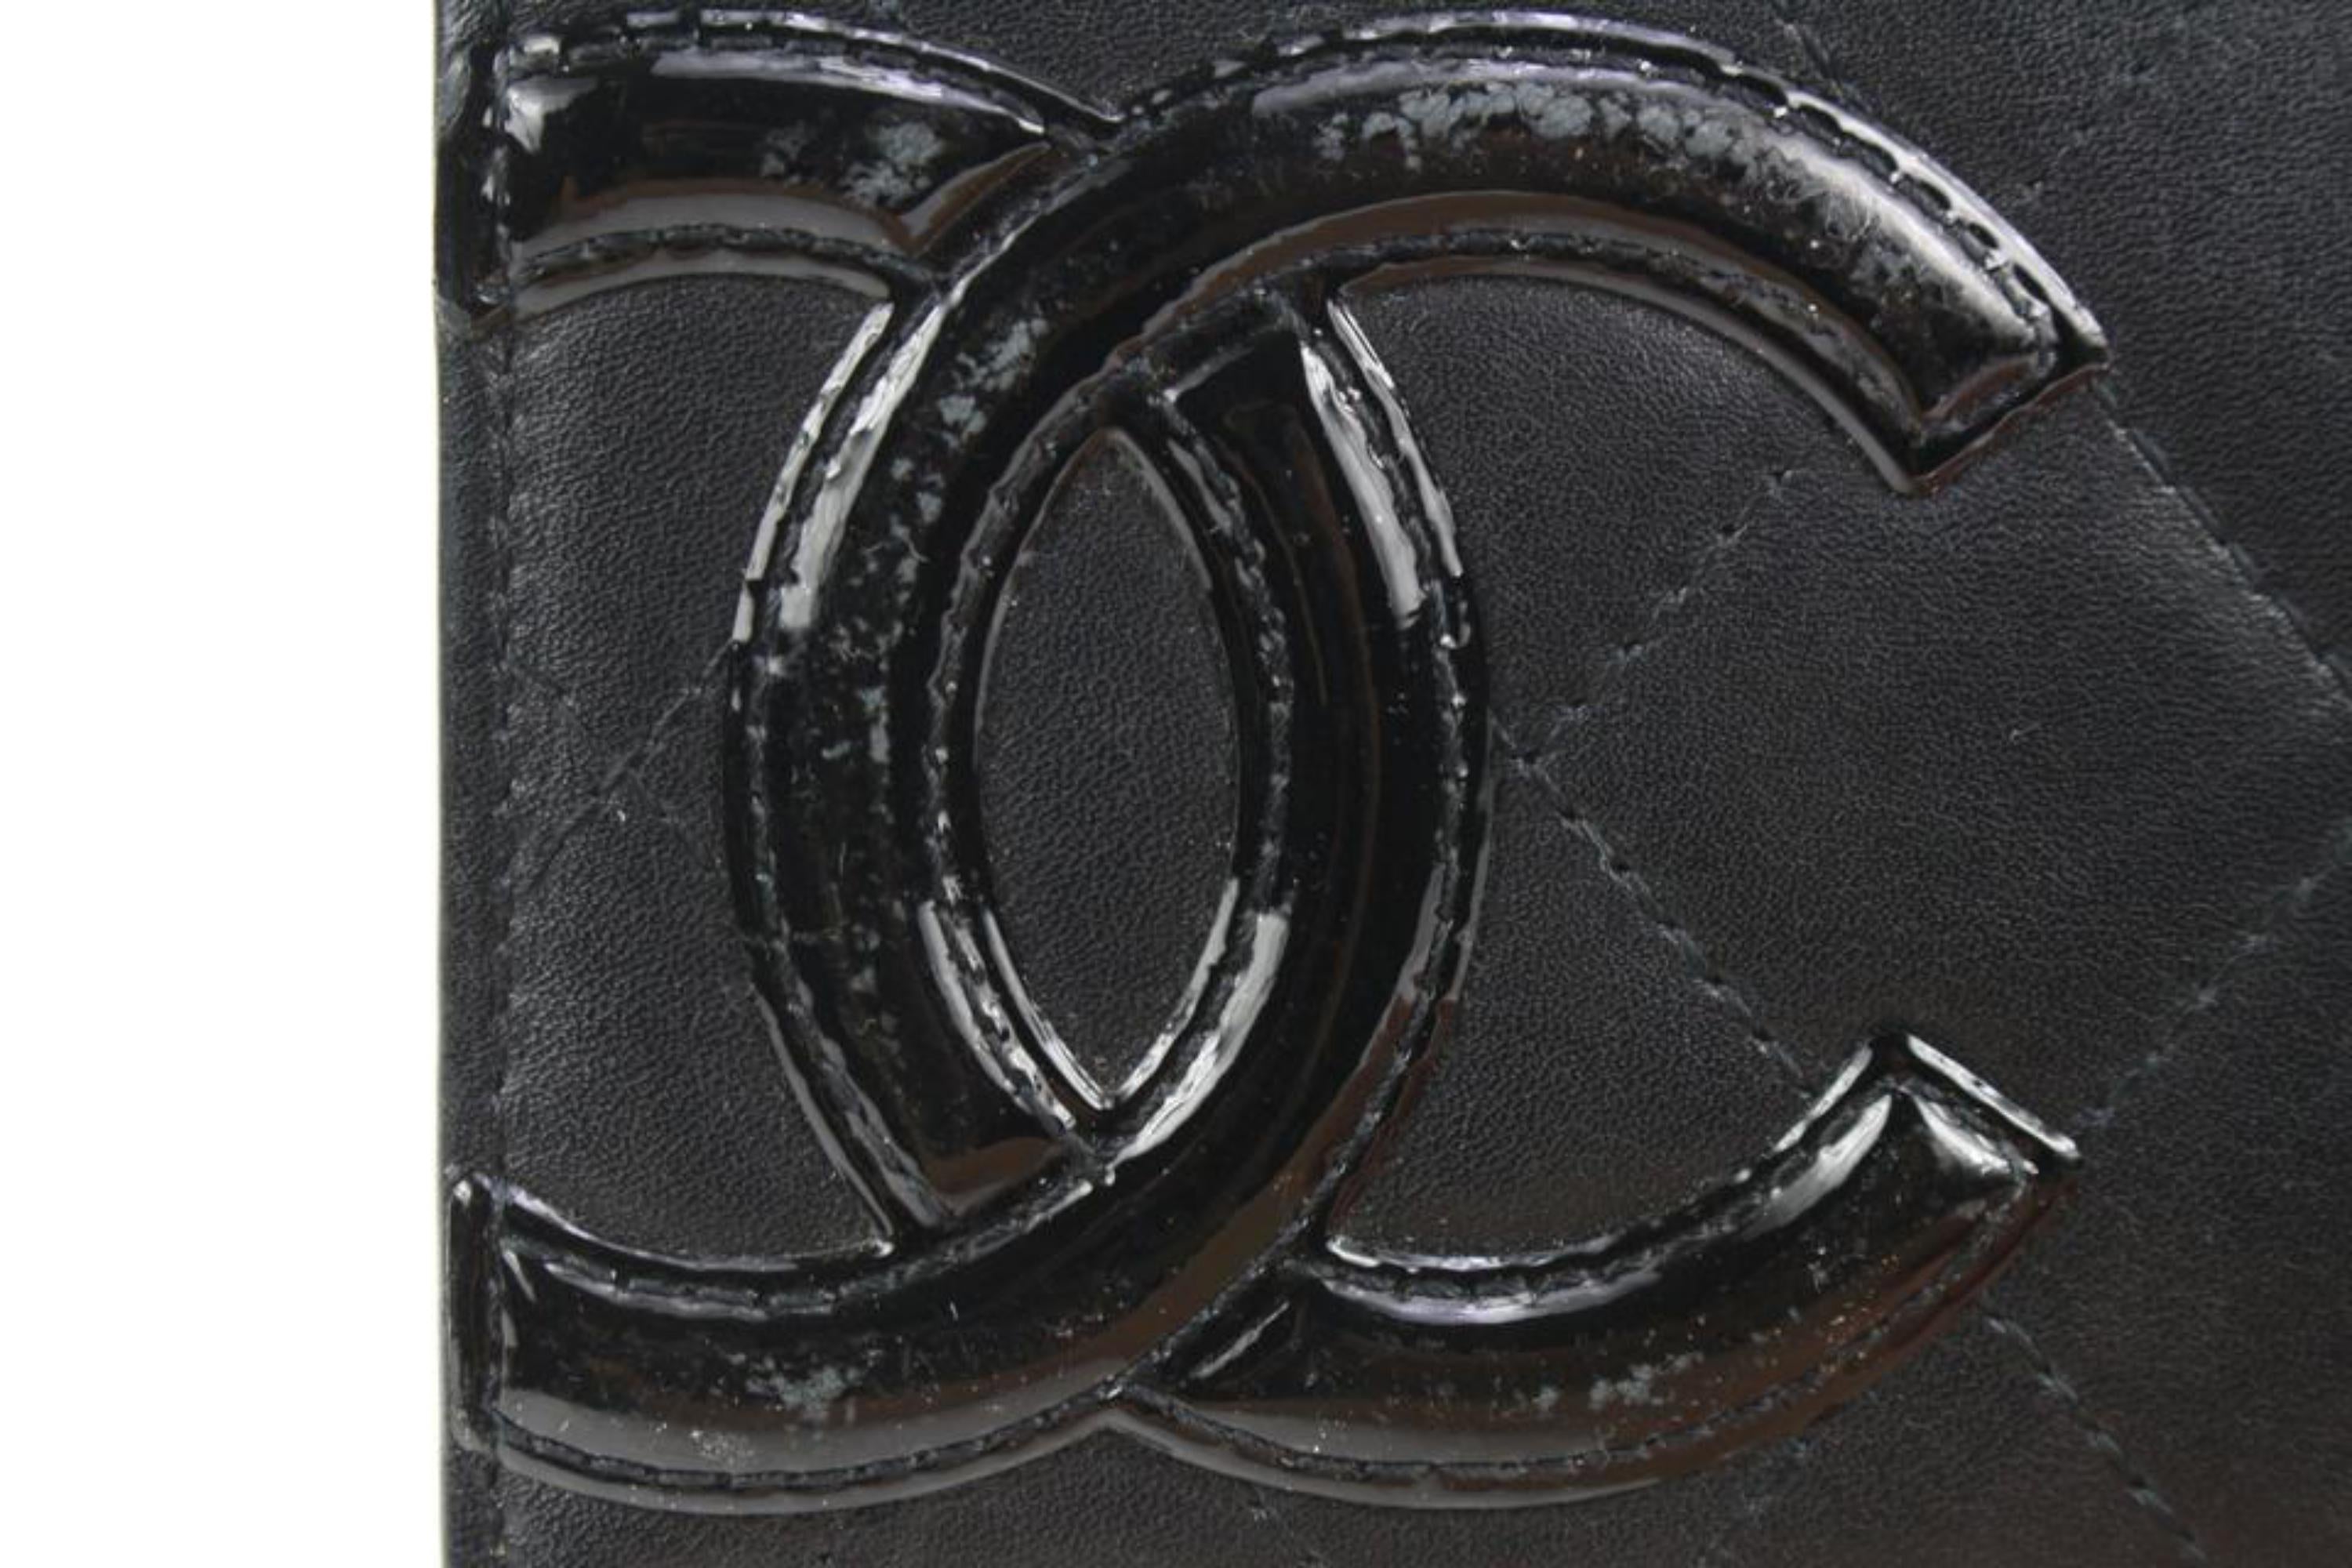 Black Patent Leather CC Logo Wallet with Guarantee Card - Chanel